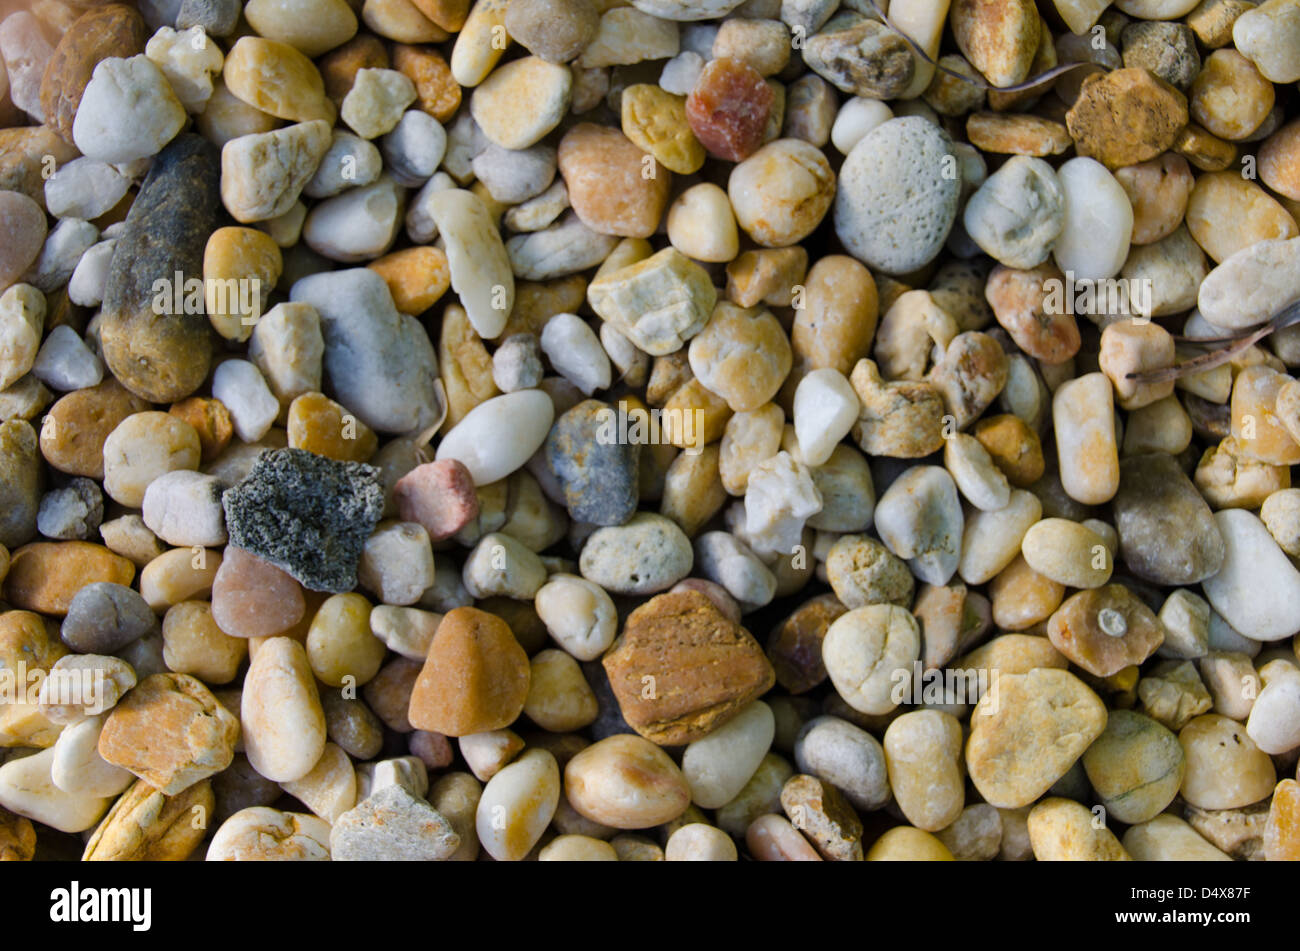 Natural background texture featuring the bright orange, white and brown rocks and pebbles of a landscaped Florida home Stock Photo